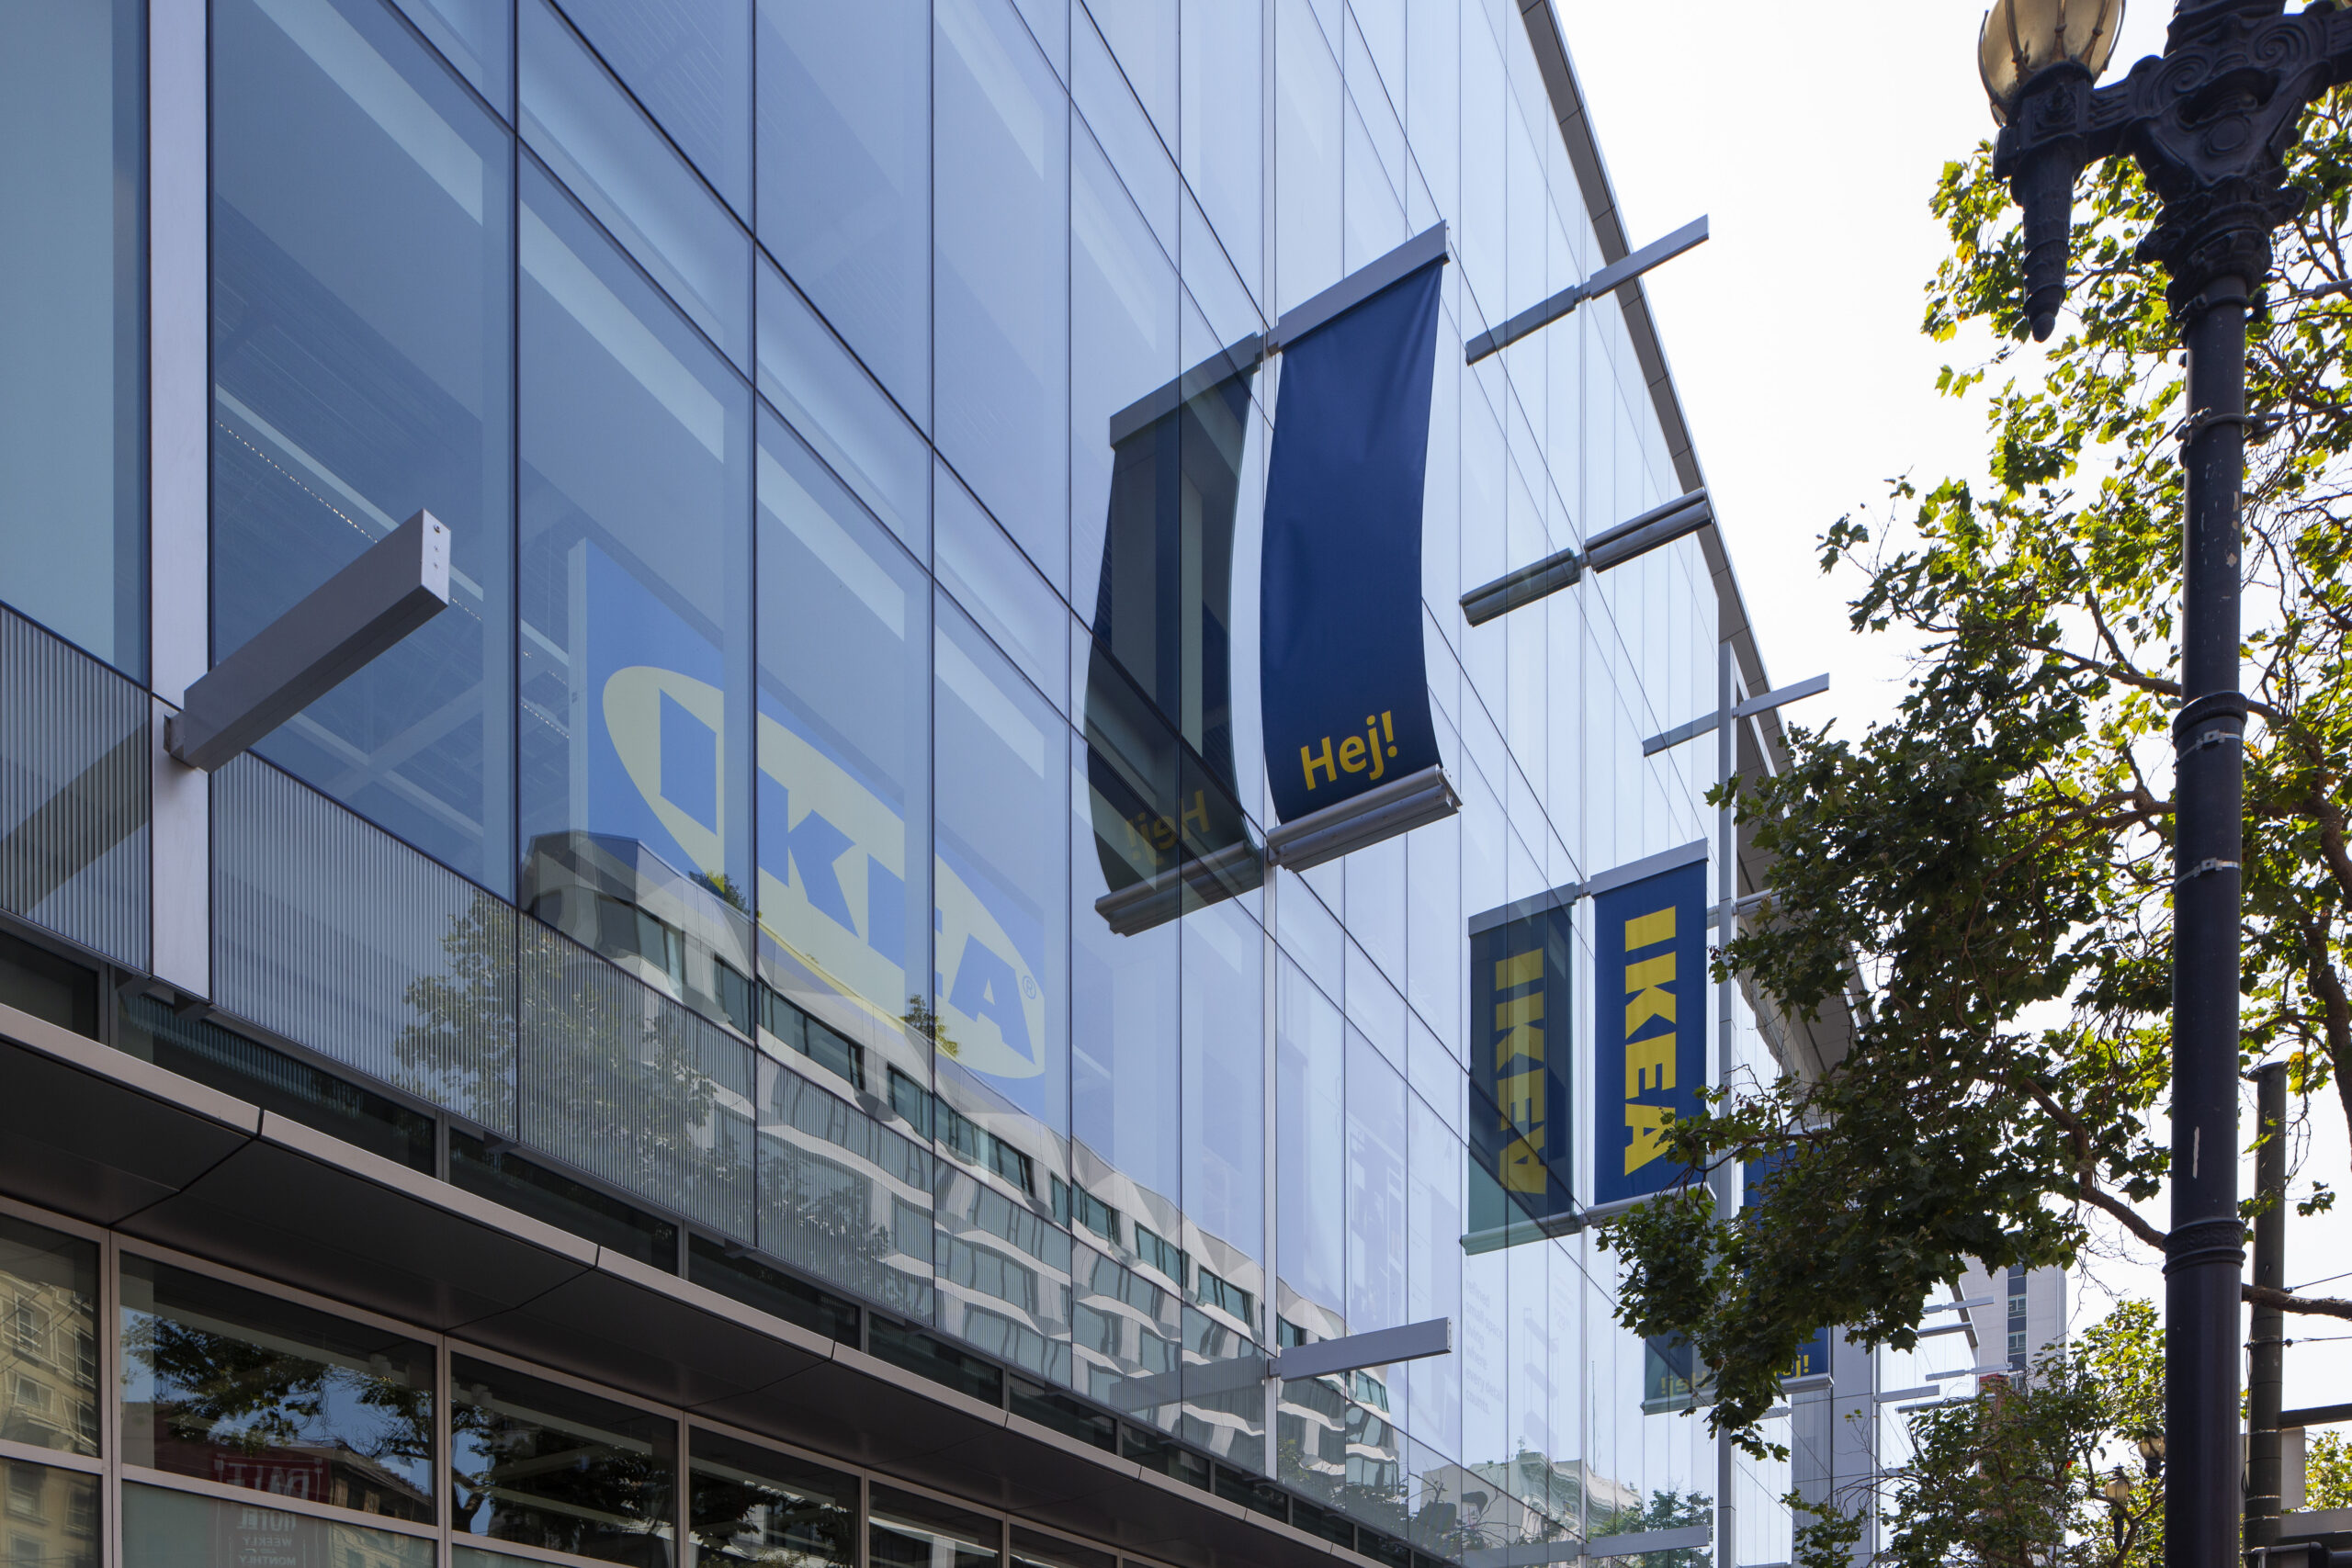 IKEA signage along Livat Mall's facade, image by author